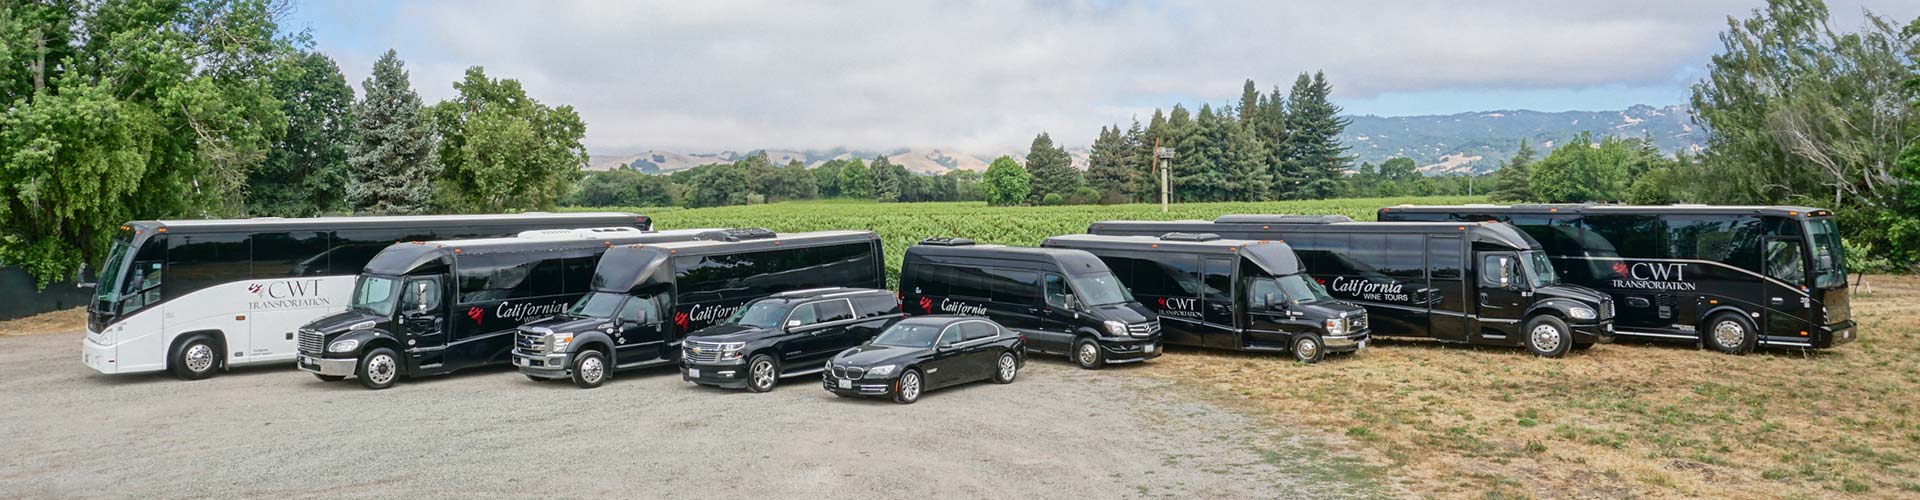 Limousines in buses in Napa Valley